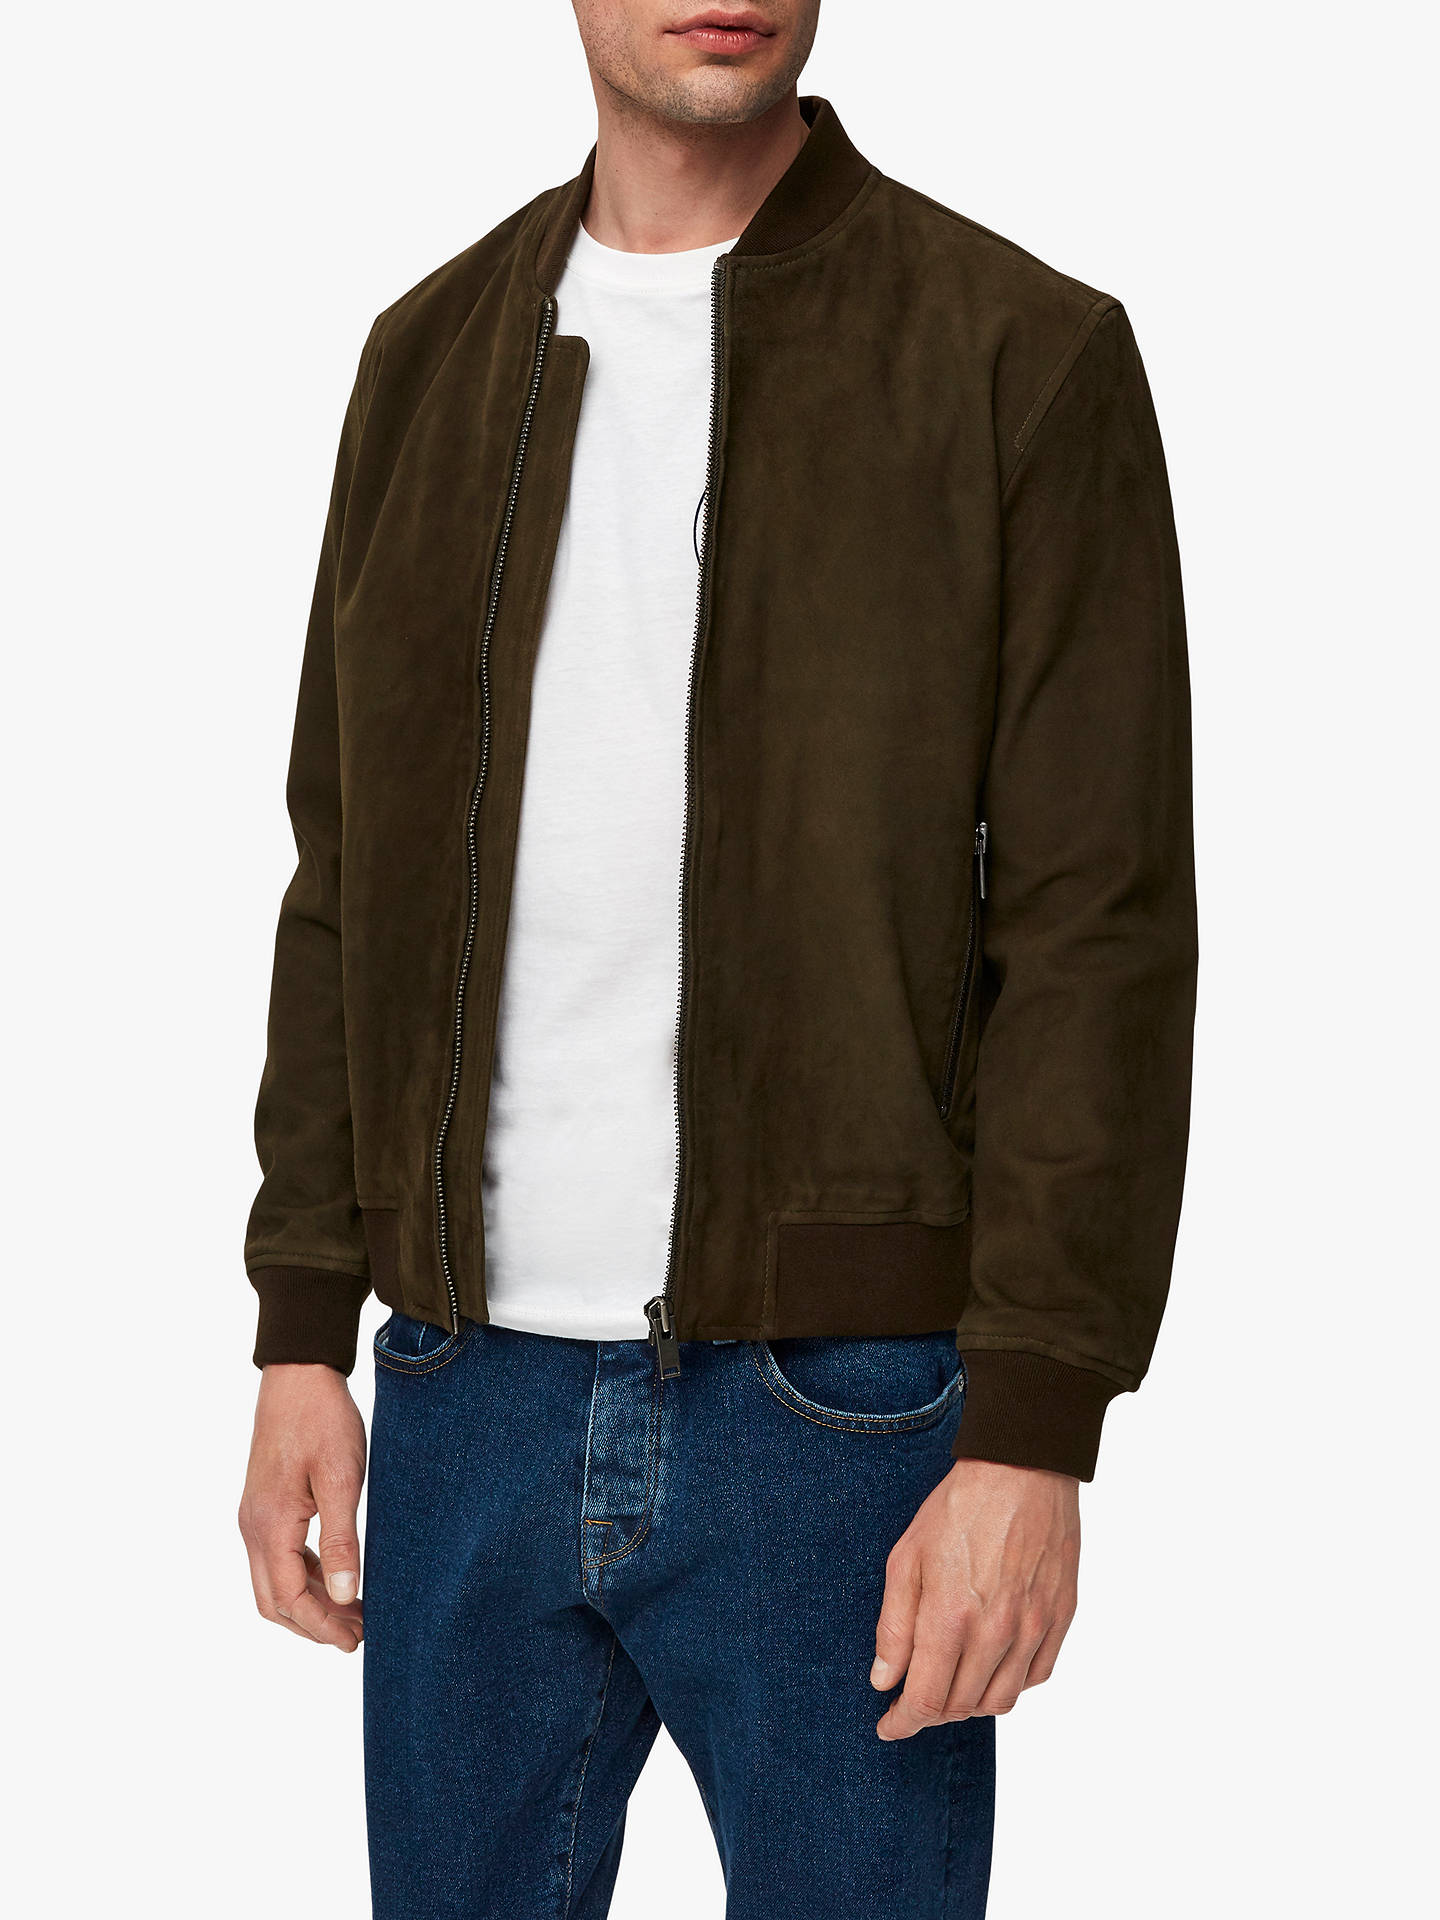 SELECTED HOMME Suede Leather Jacket, Brown at John Lewis & Partners